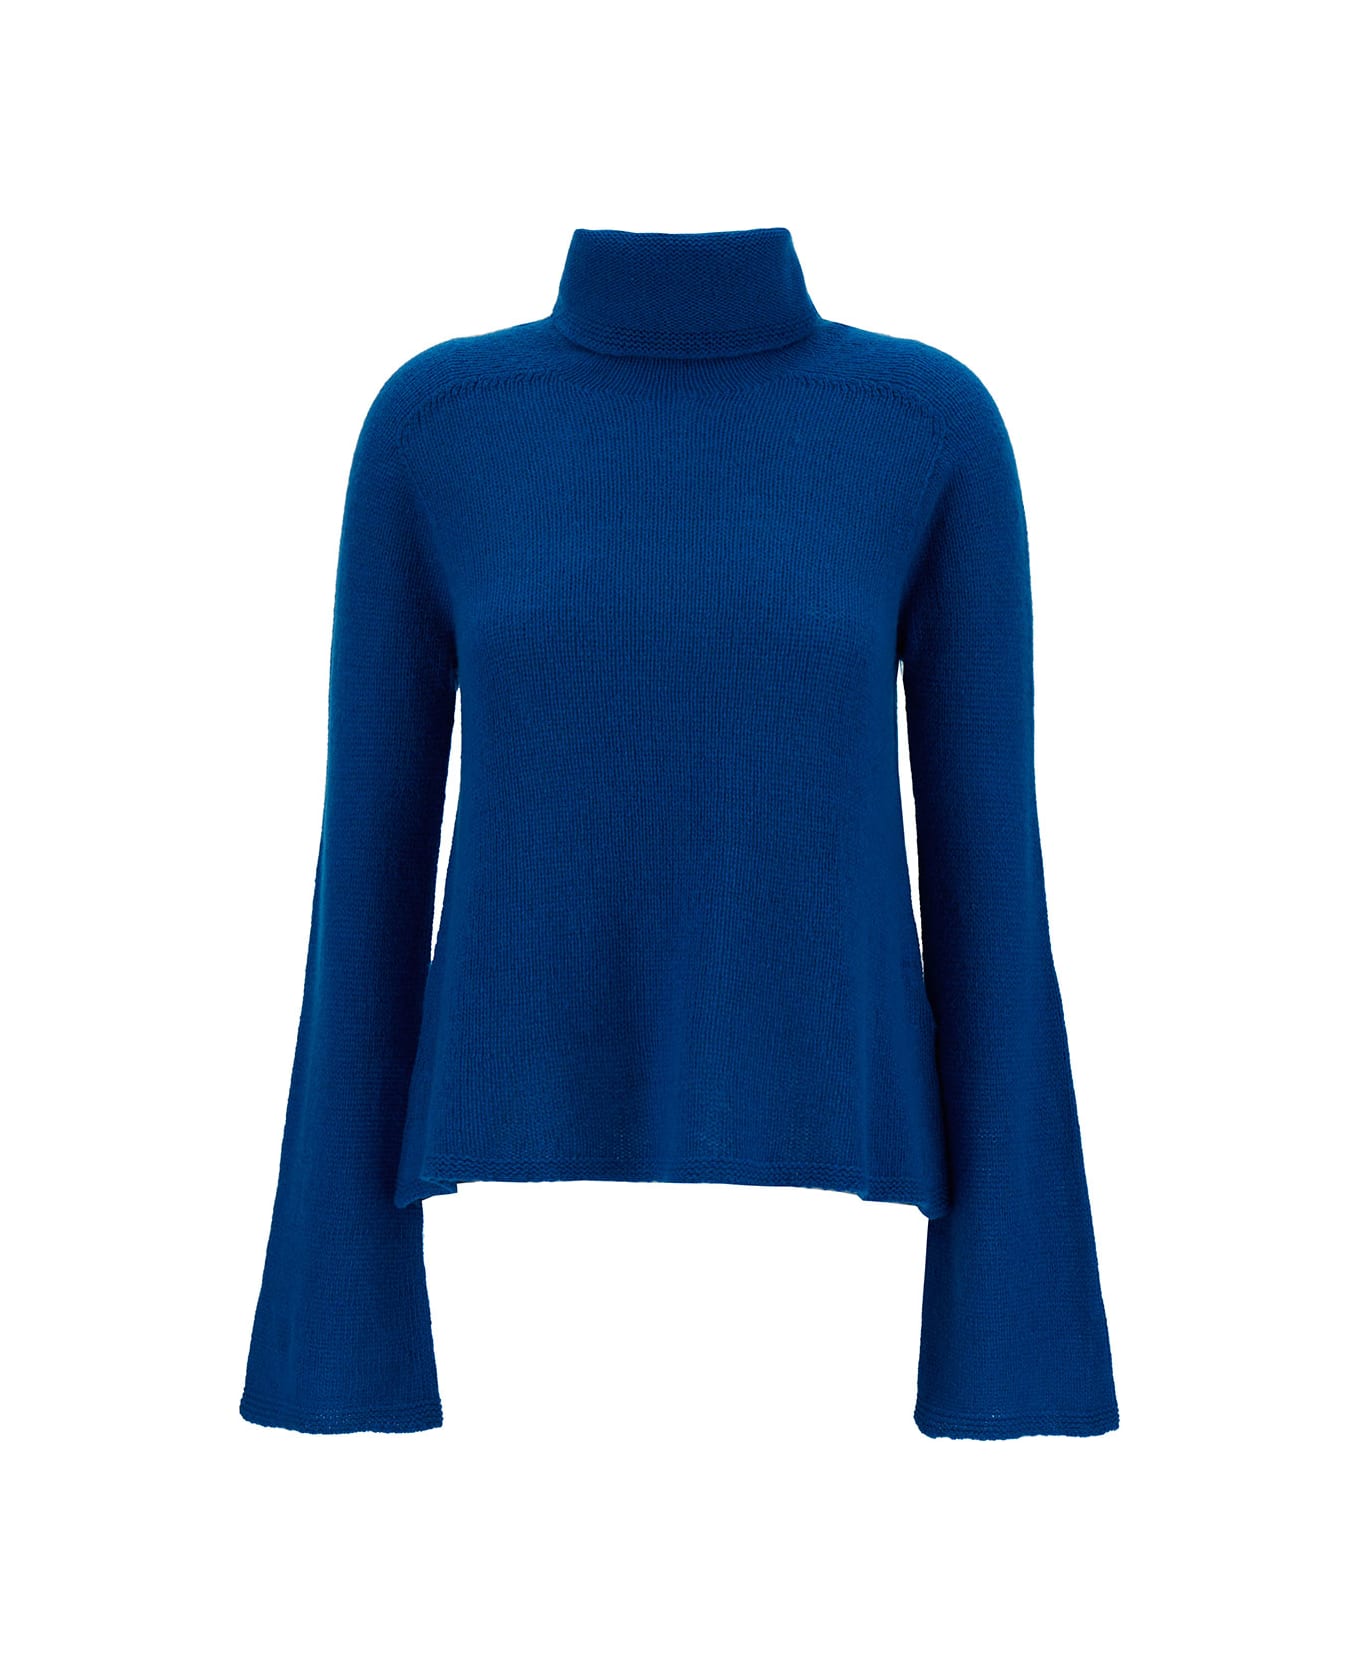 SEMICOUTURE 'ginger' Blue Turtleneck With Flare Sleeves In Fabric Woman - Blu